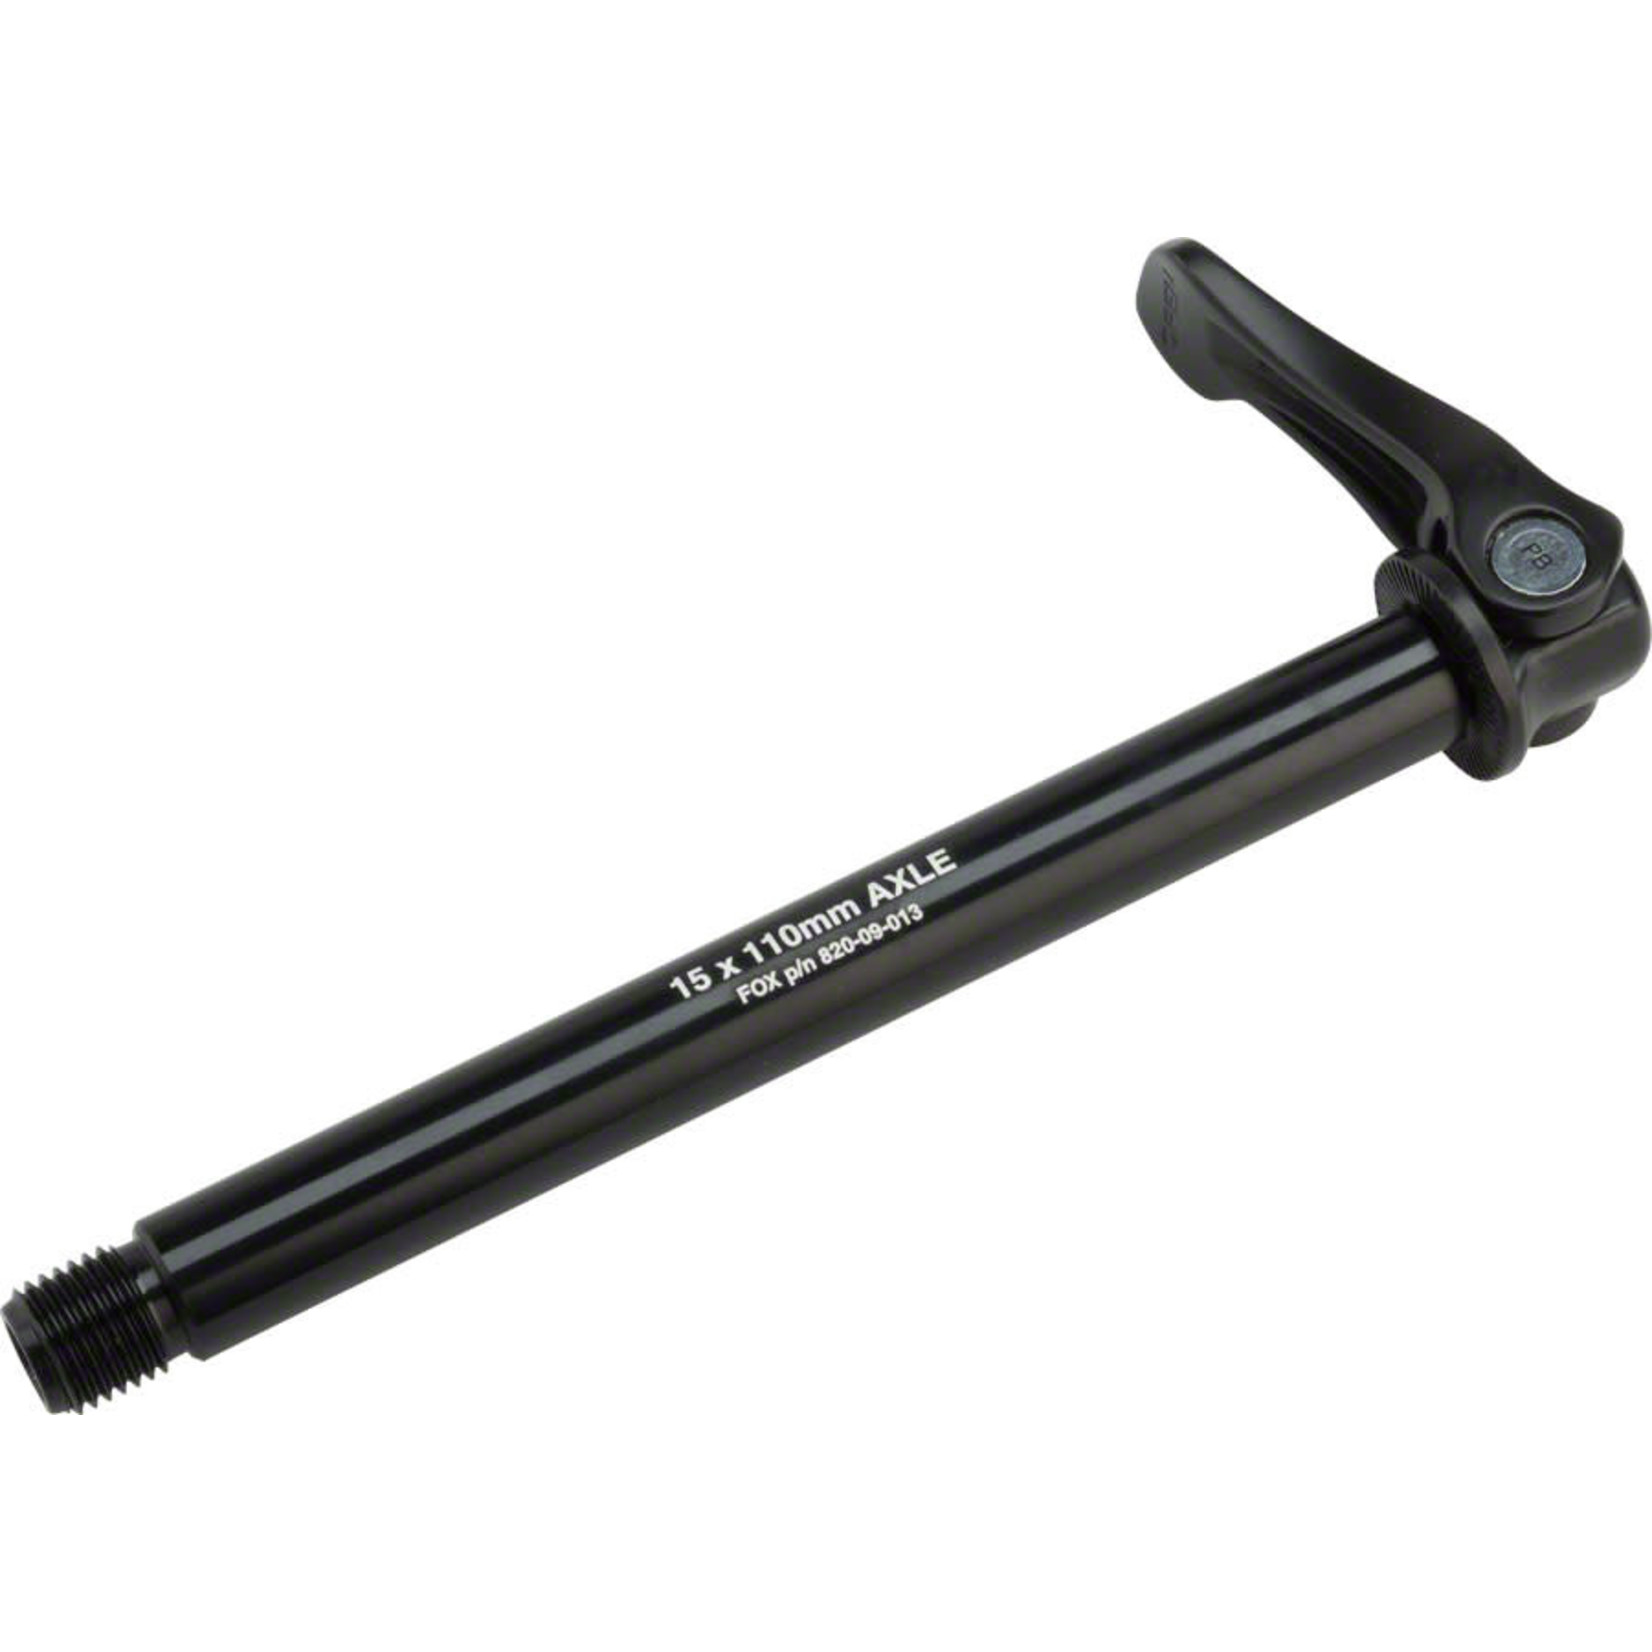 Fox QR 15 Axle Assembly - 15x110 mm Forks